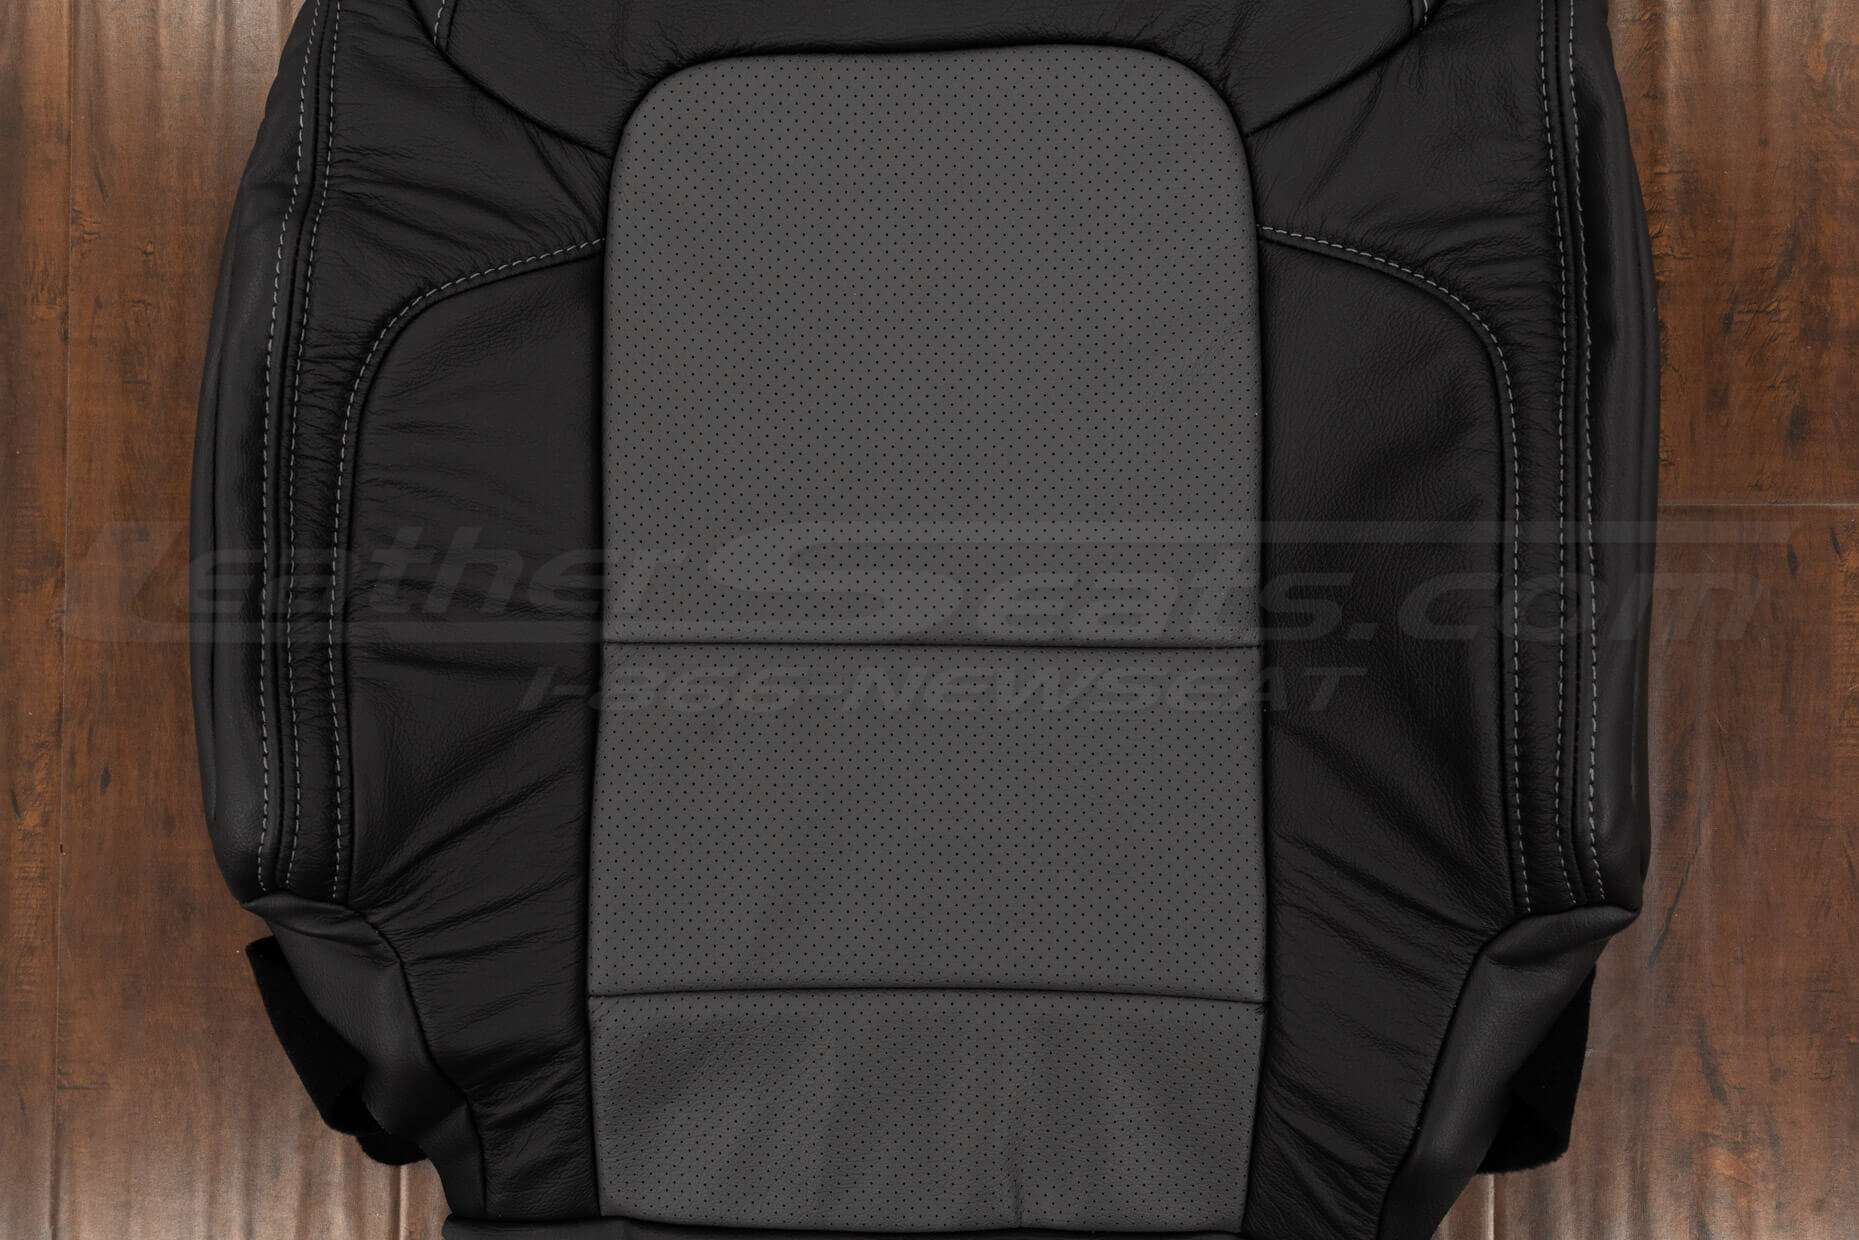 Perforated Charcoal inserts section of backrest